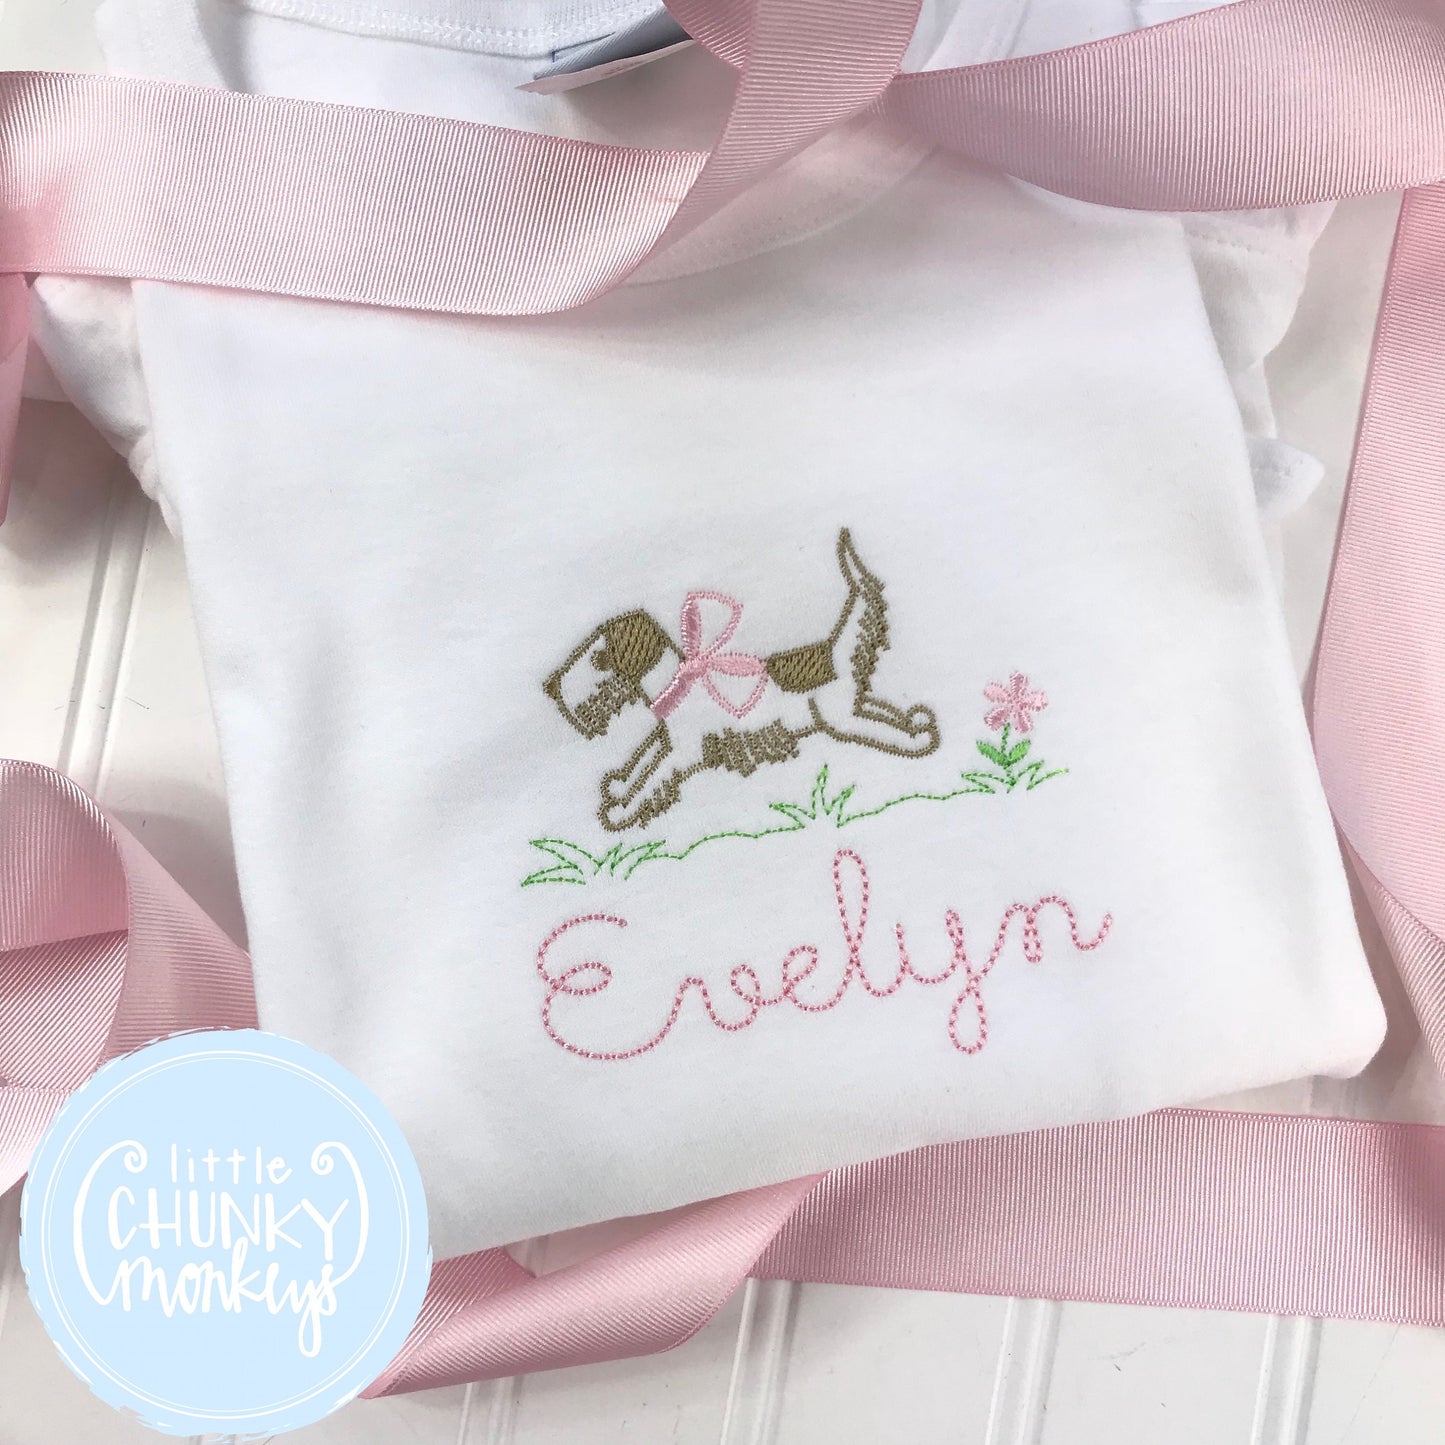 Girl Shirt - Stitched Dog with Bow + Personalization